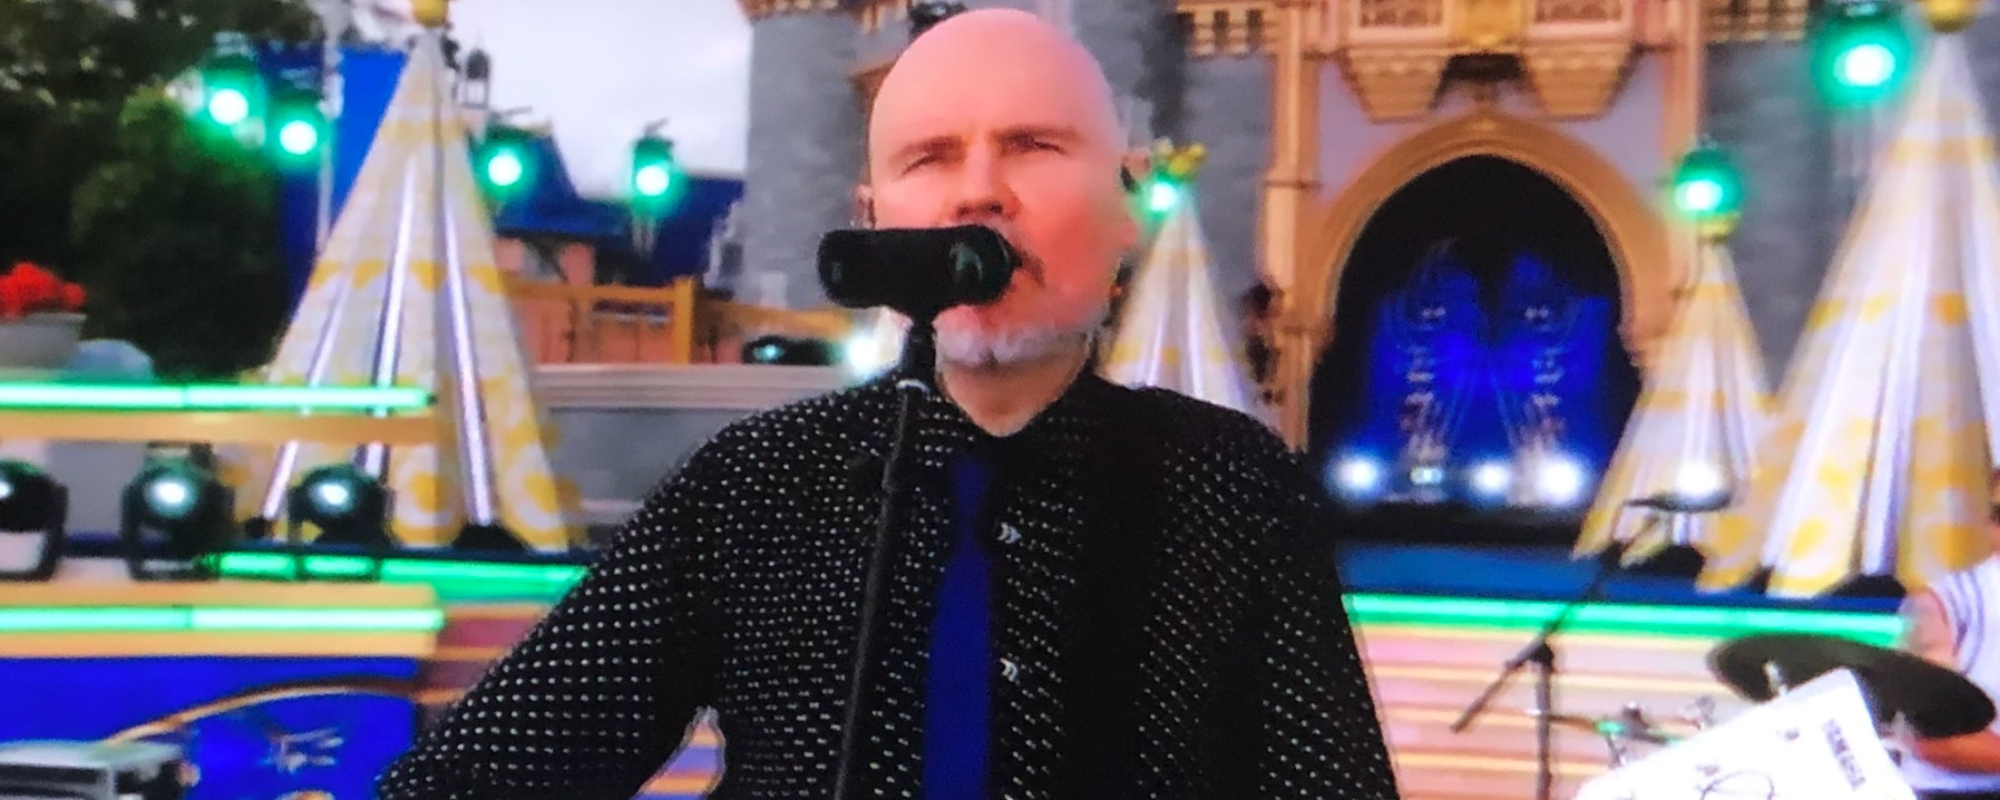 Fans Left Confused over The Smashing Pumpkins’ ‘Disney Parks Magical Christmas Day Parade’ Performance